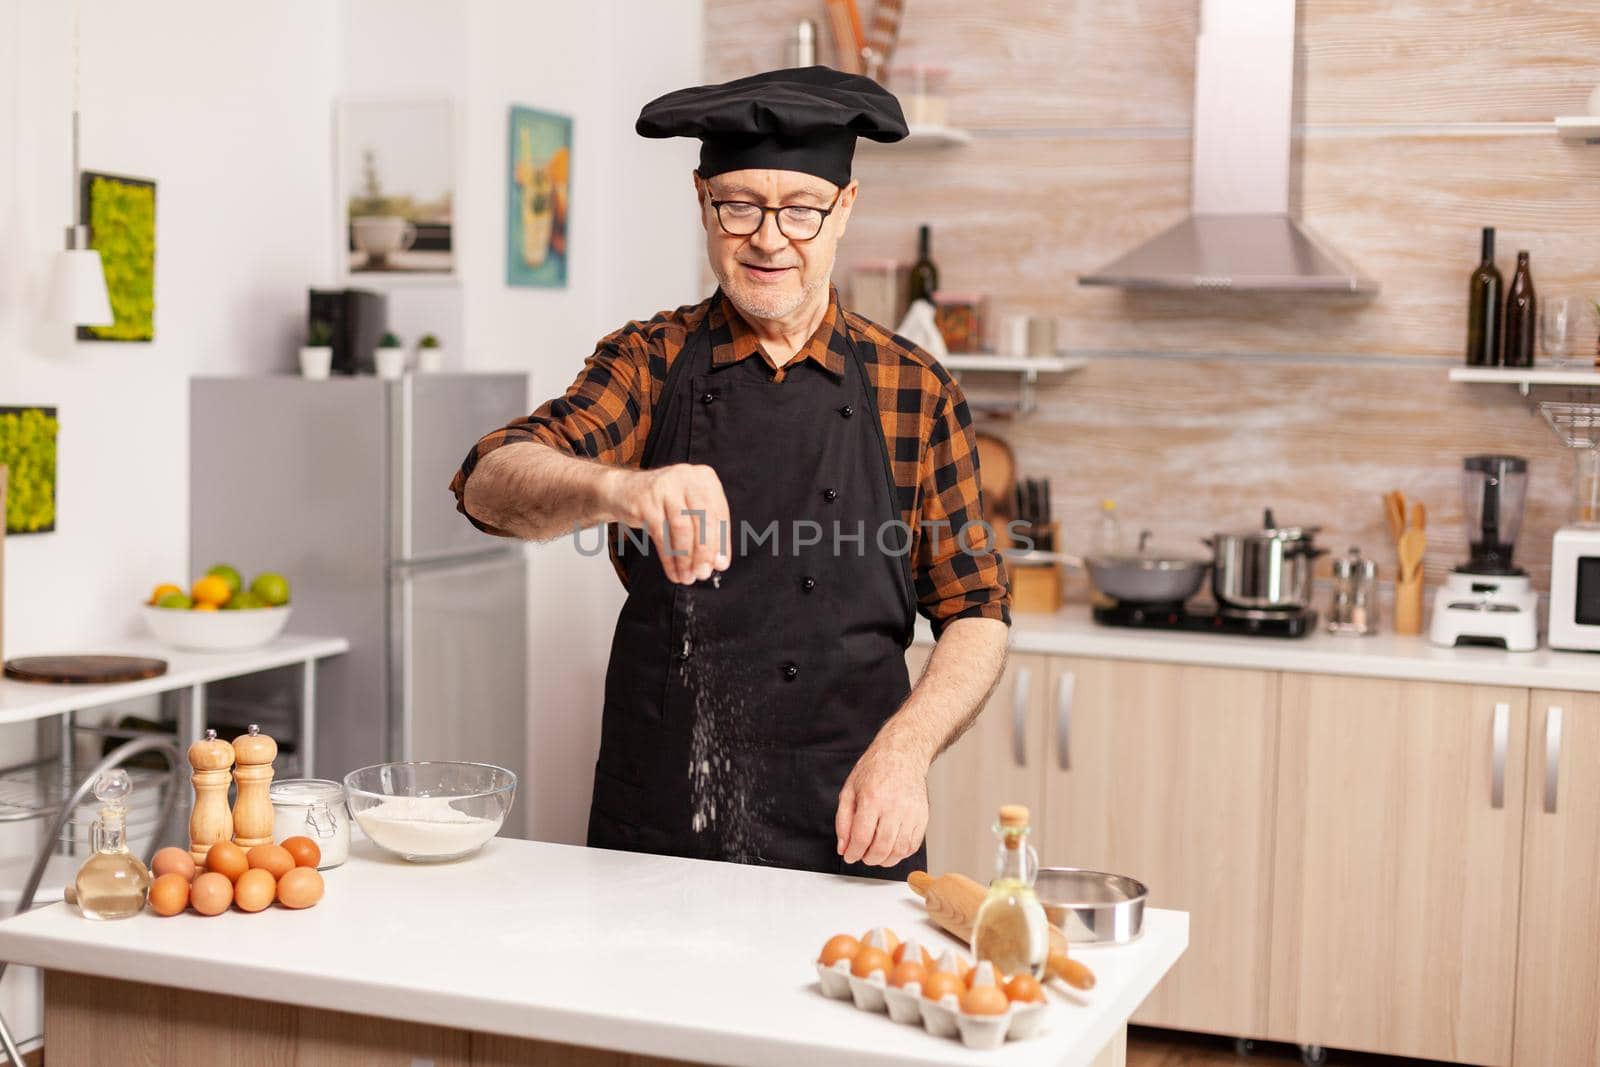 Senior baker sprinkling whear flour on home kitche table for tasty recipe. Retired chef with bonete and apron, in kitchen uniform sprinkling sieving sifting ingredients by hand.